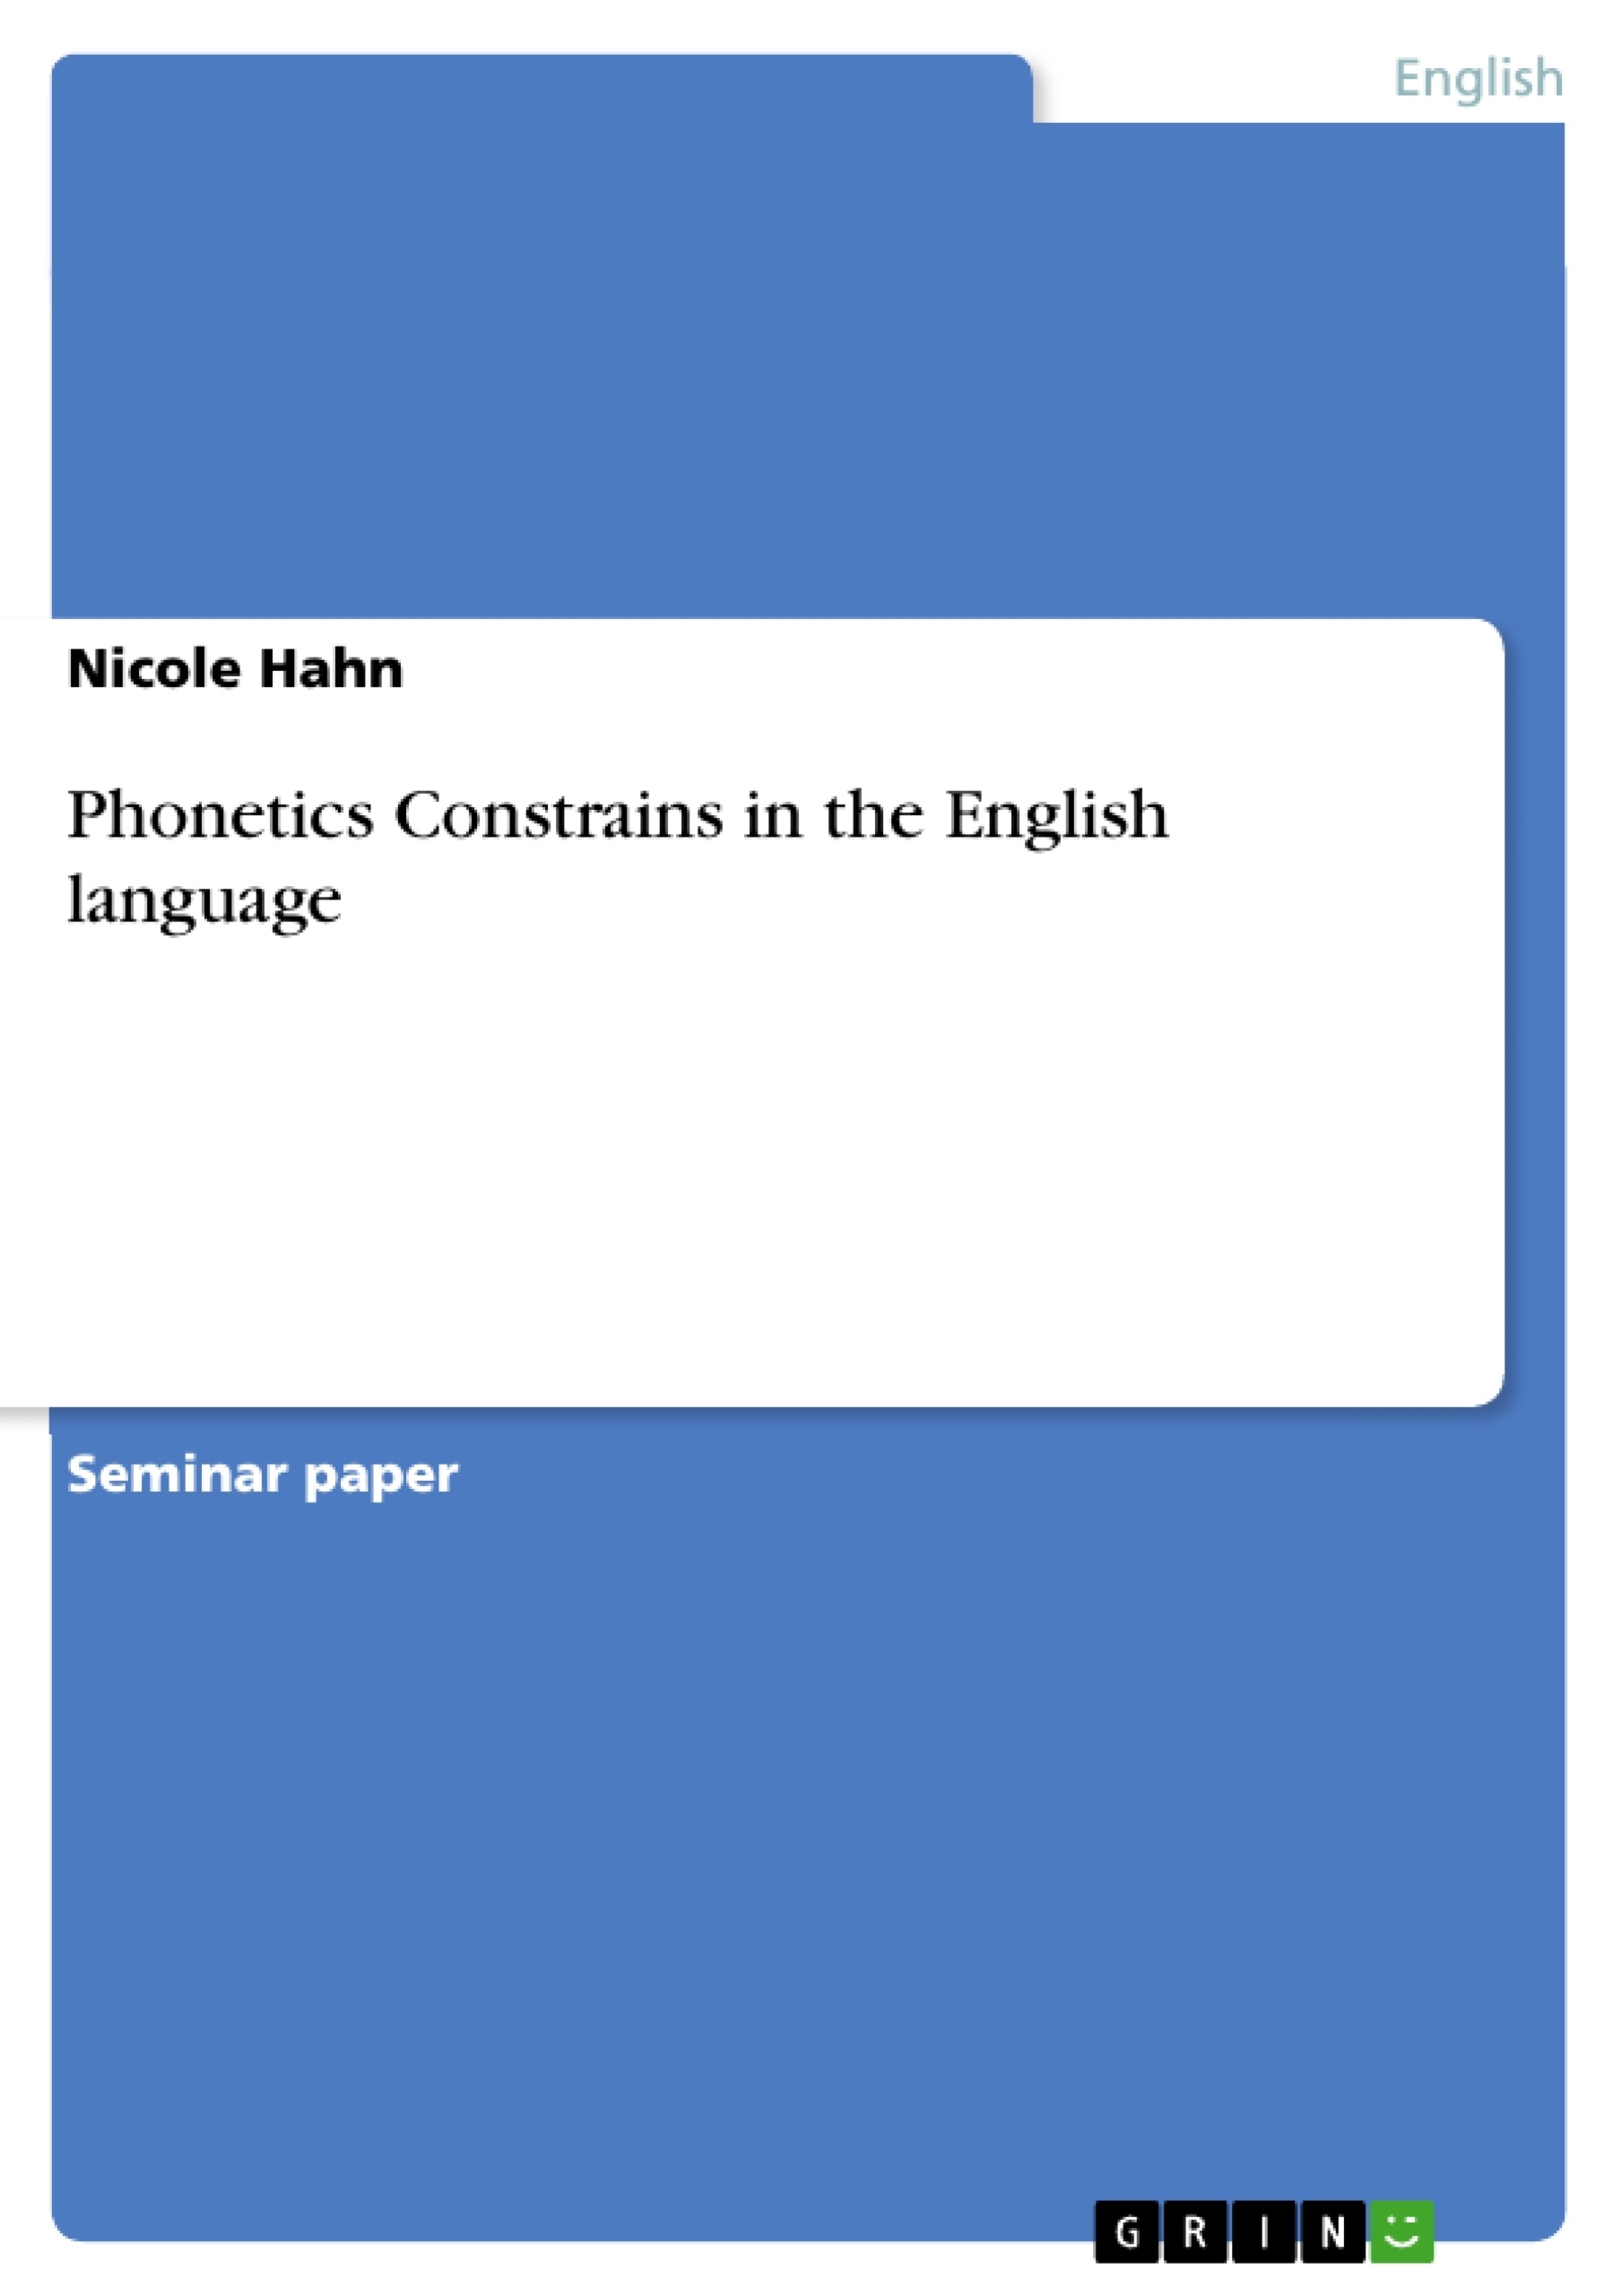 Titre: Phonetics Constrains in the English language